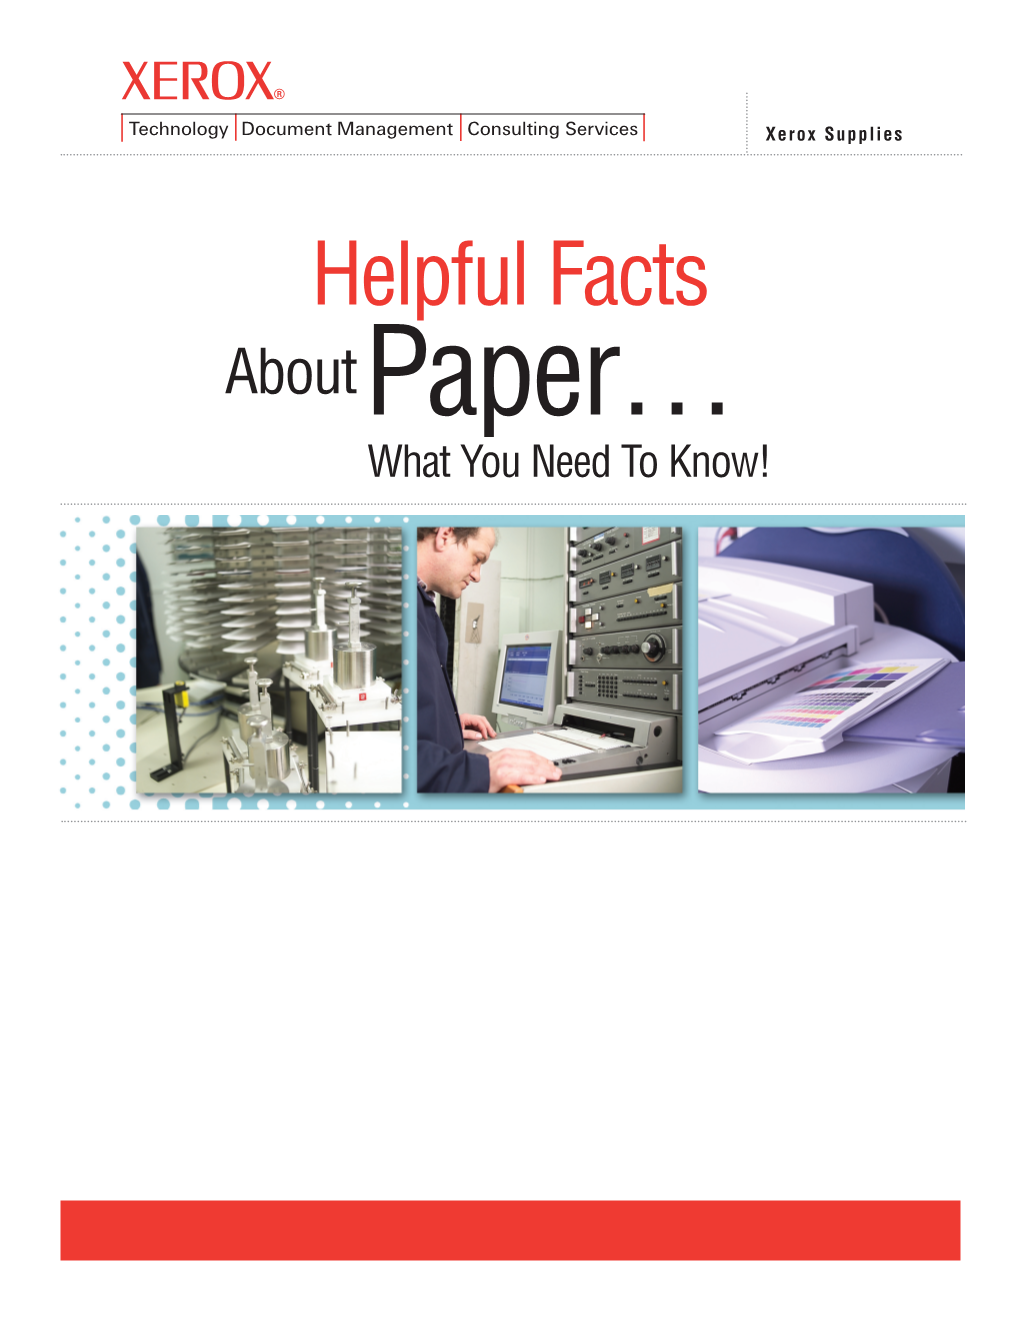 Helpful Facts About Paper (PDF)